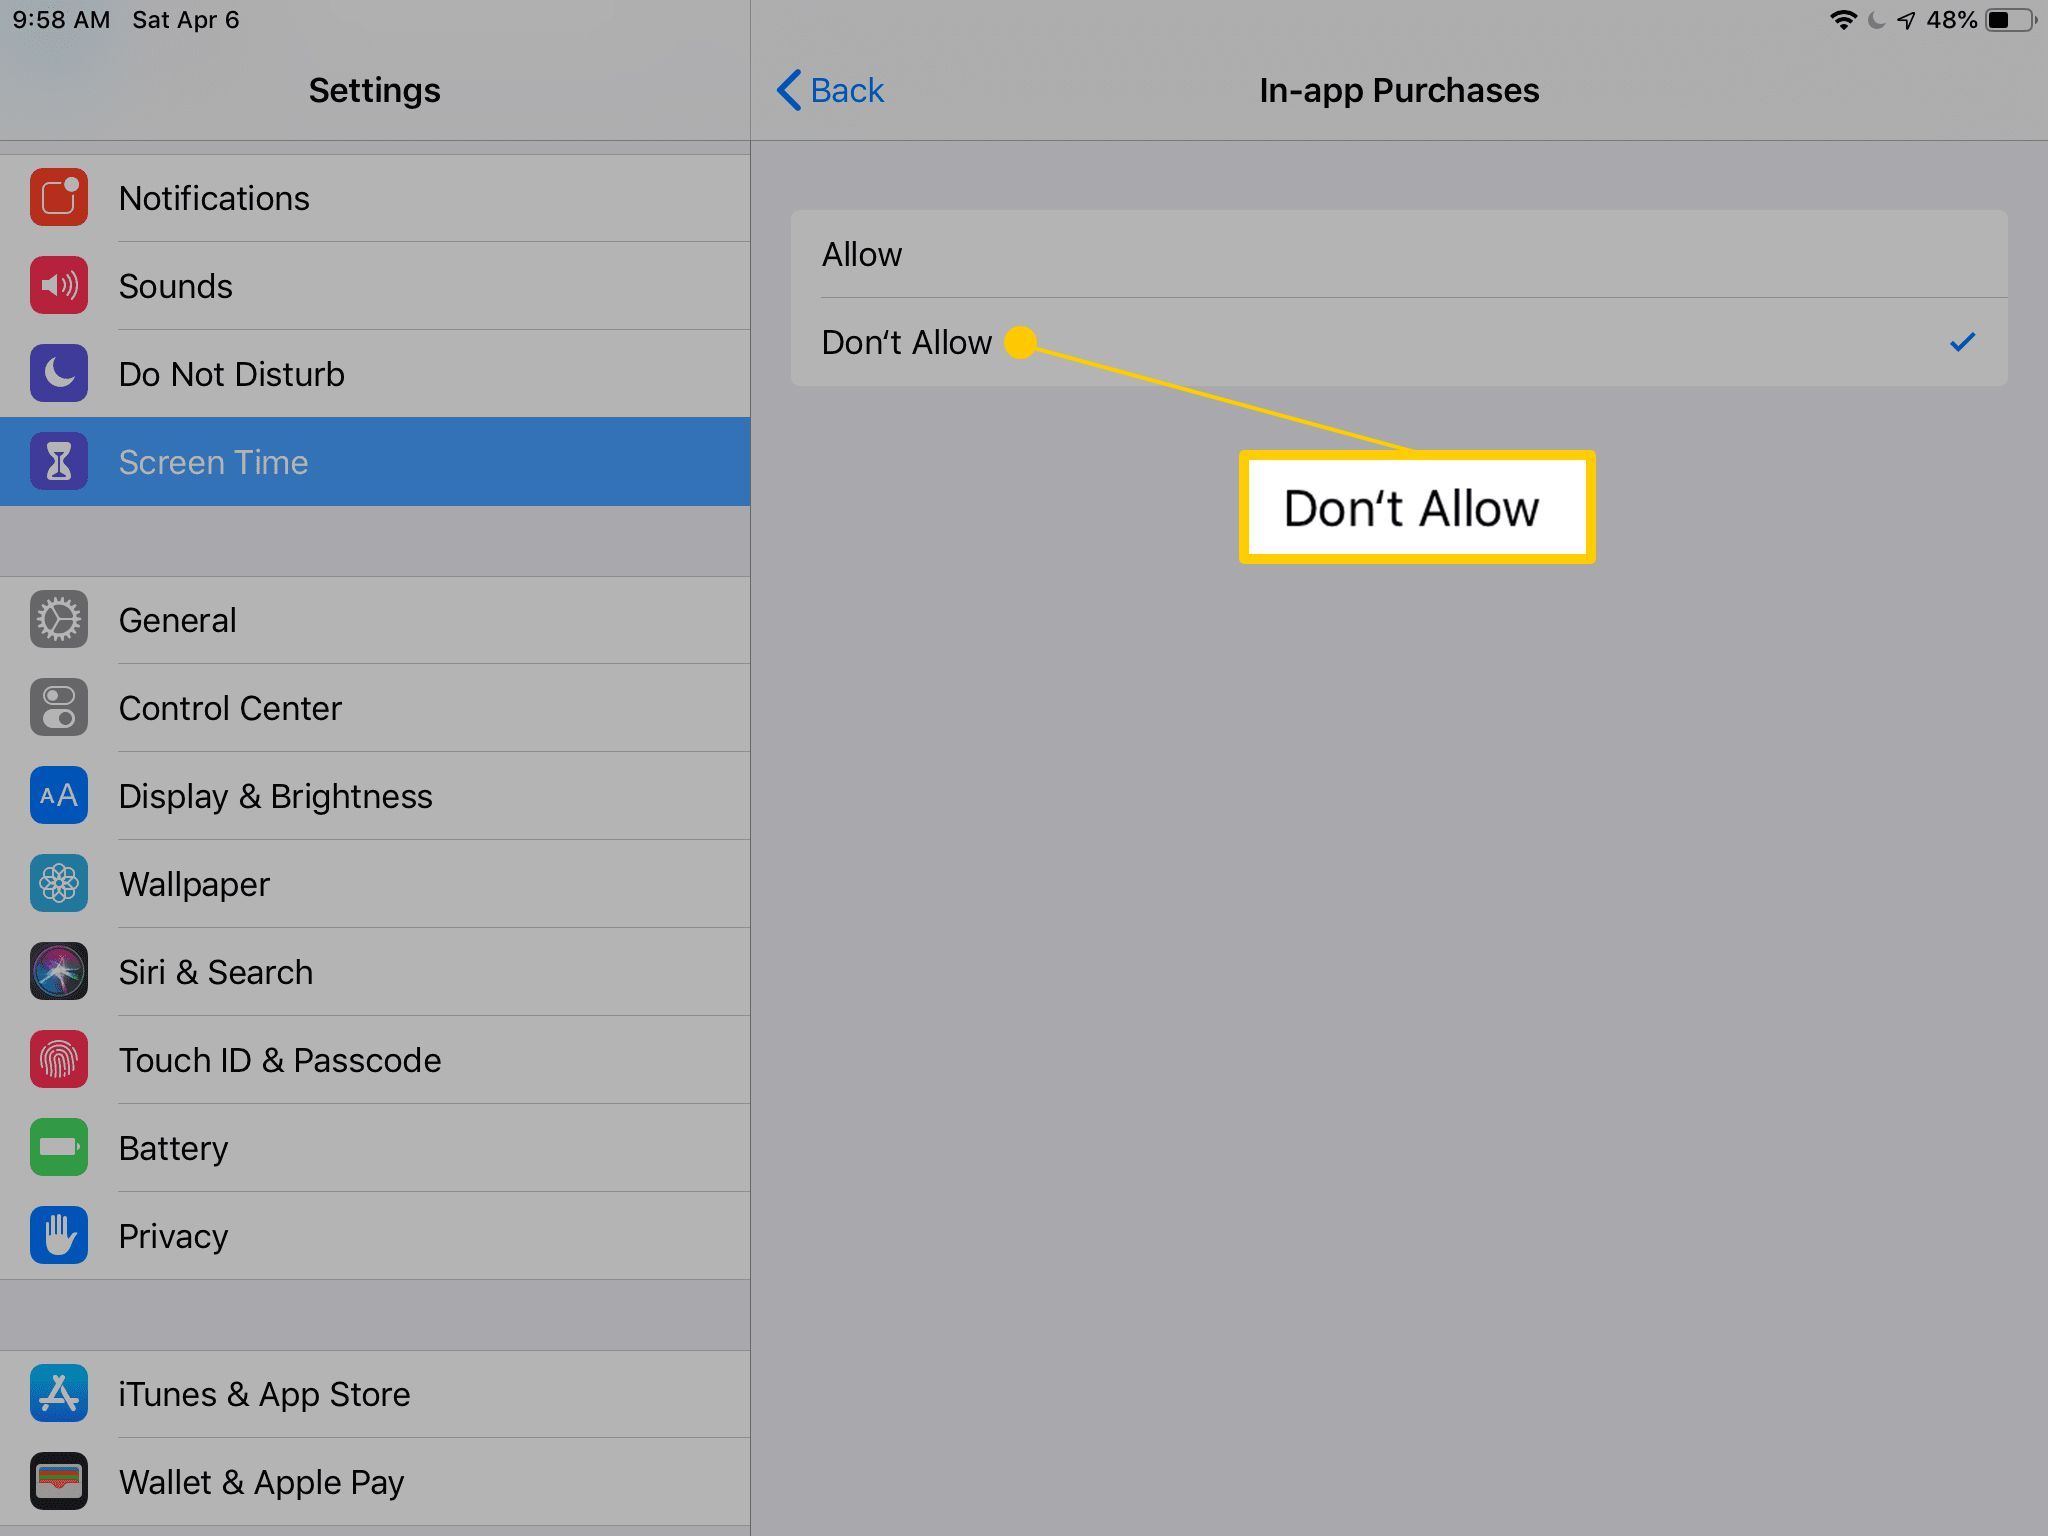 дон't Allow option for In-app Purchases in iOS